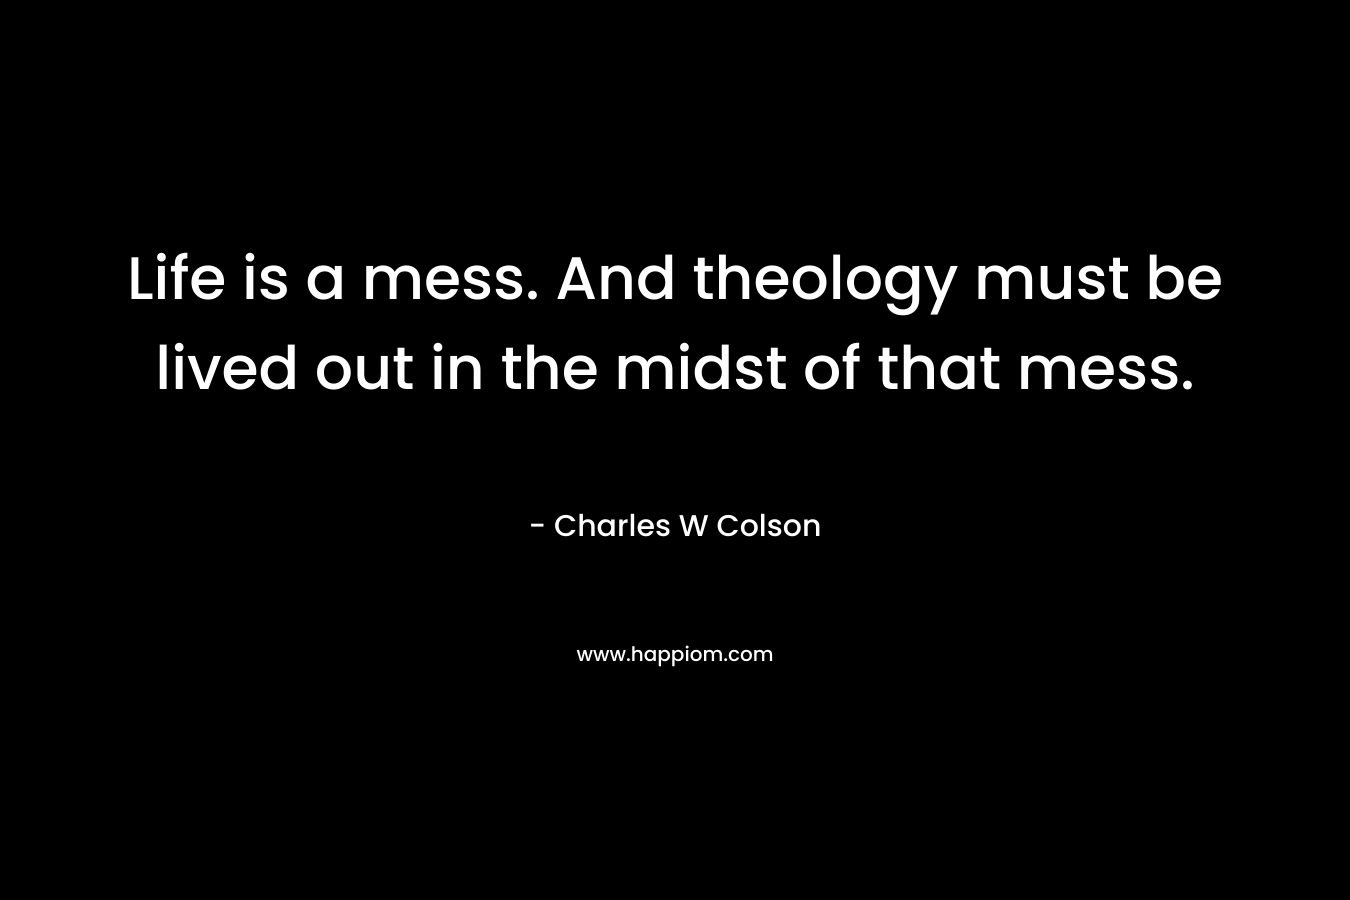 Life is a mess. And theology must be lived out in the midst of that mess.